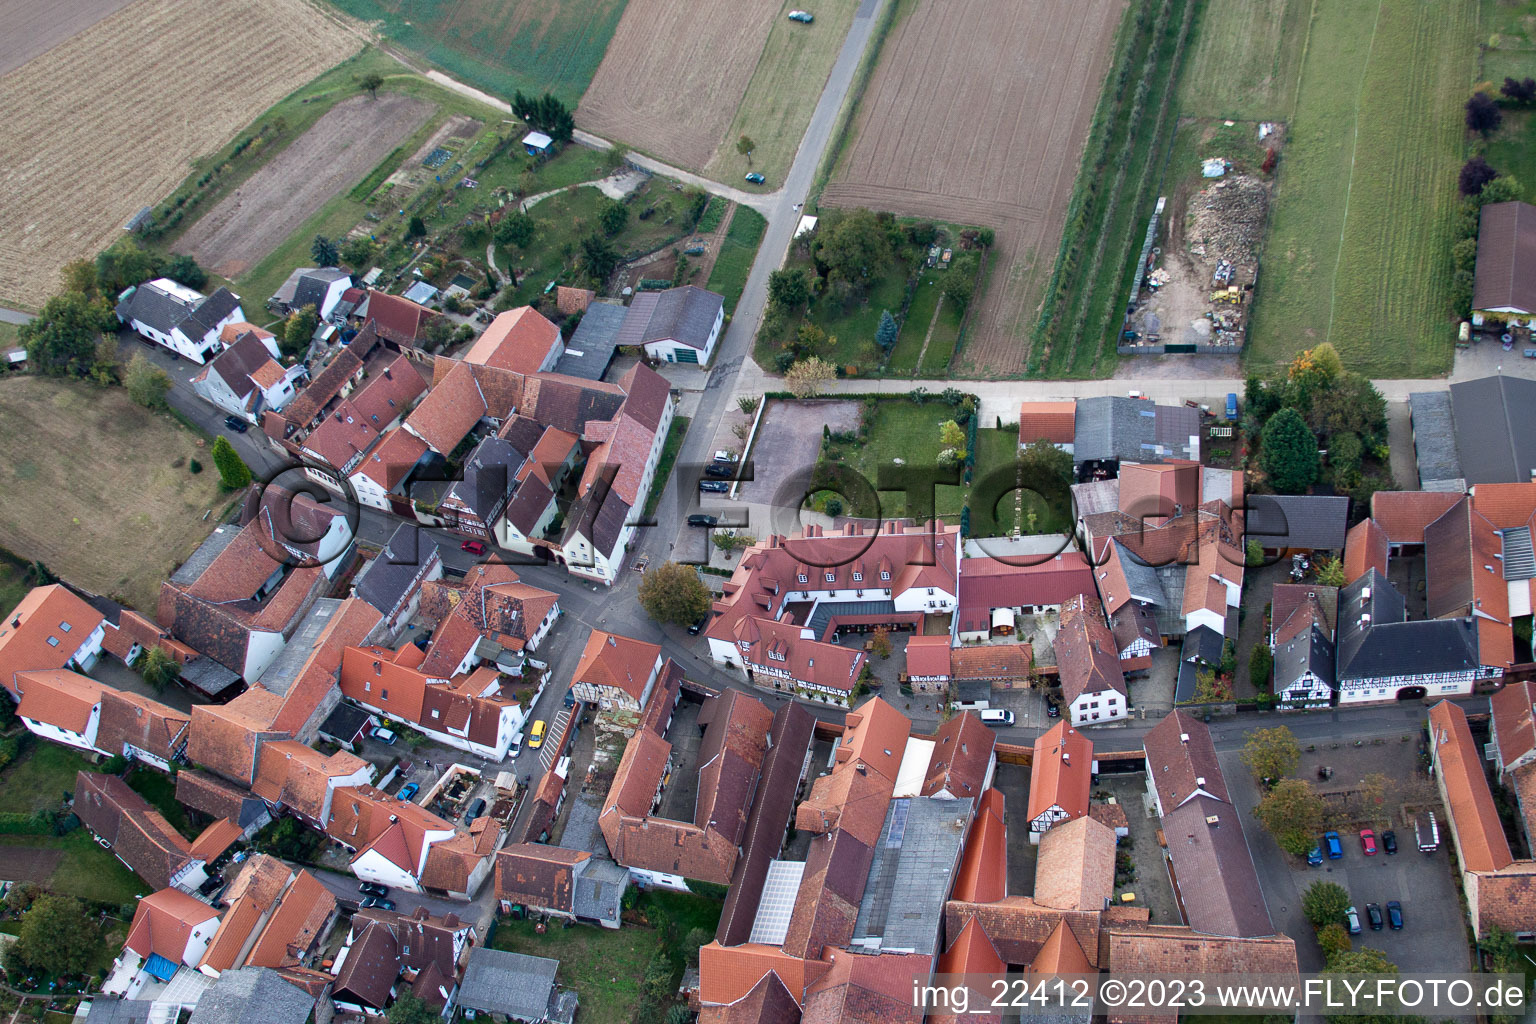 Bird's eye view of District Oberhofen in Pleisweiler-Oberhofen in the state Rhineland-Palatinate, Germany